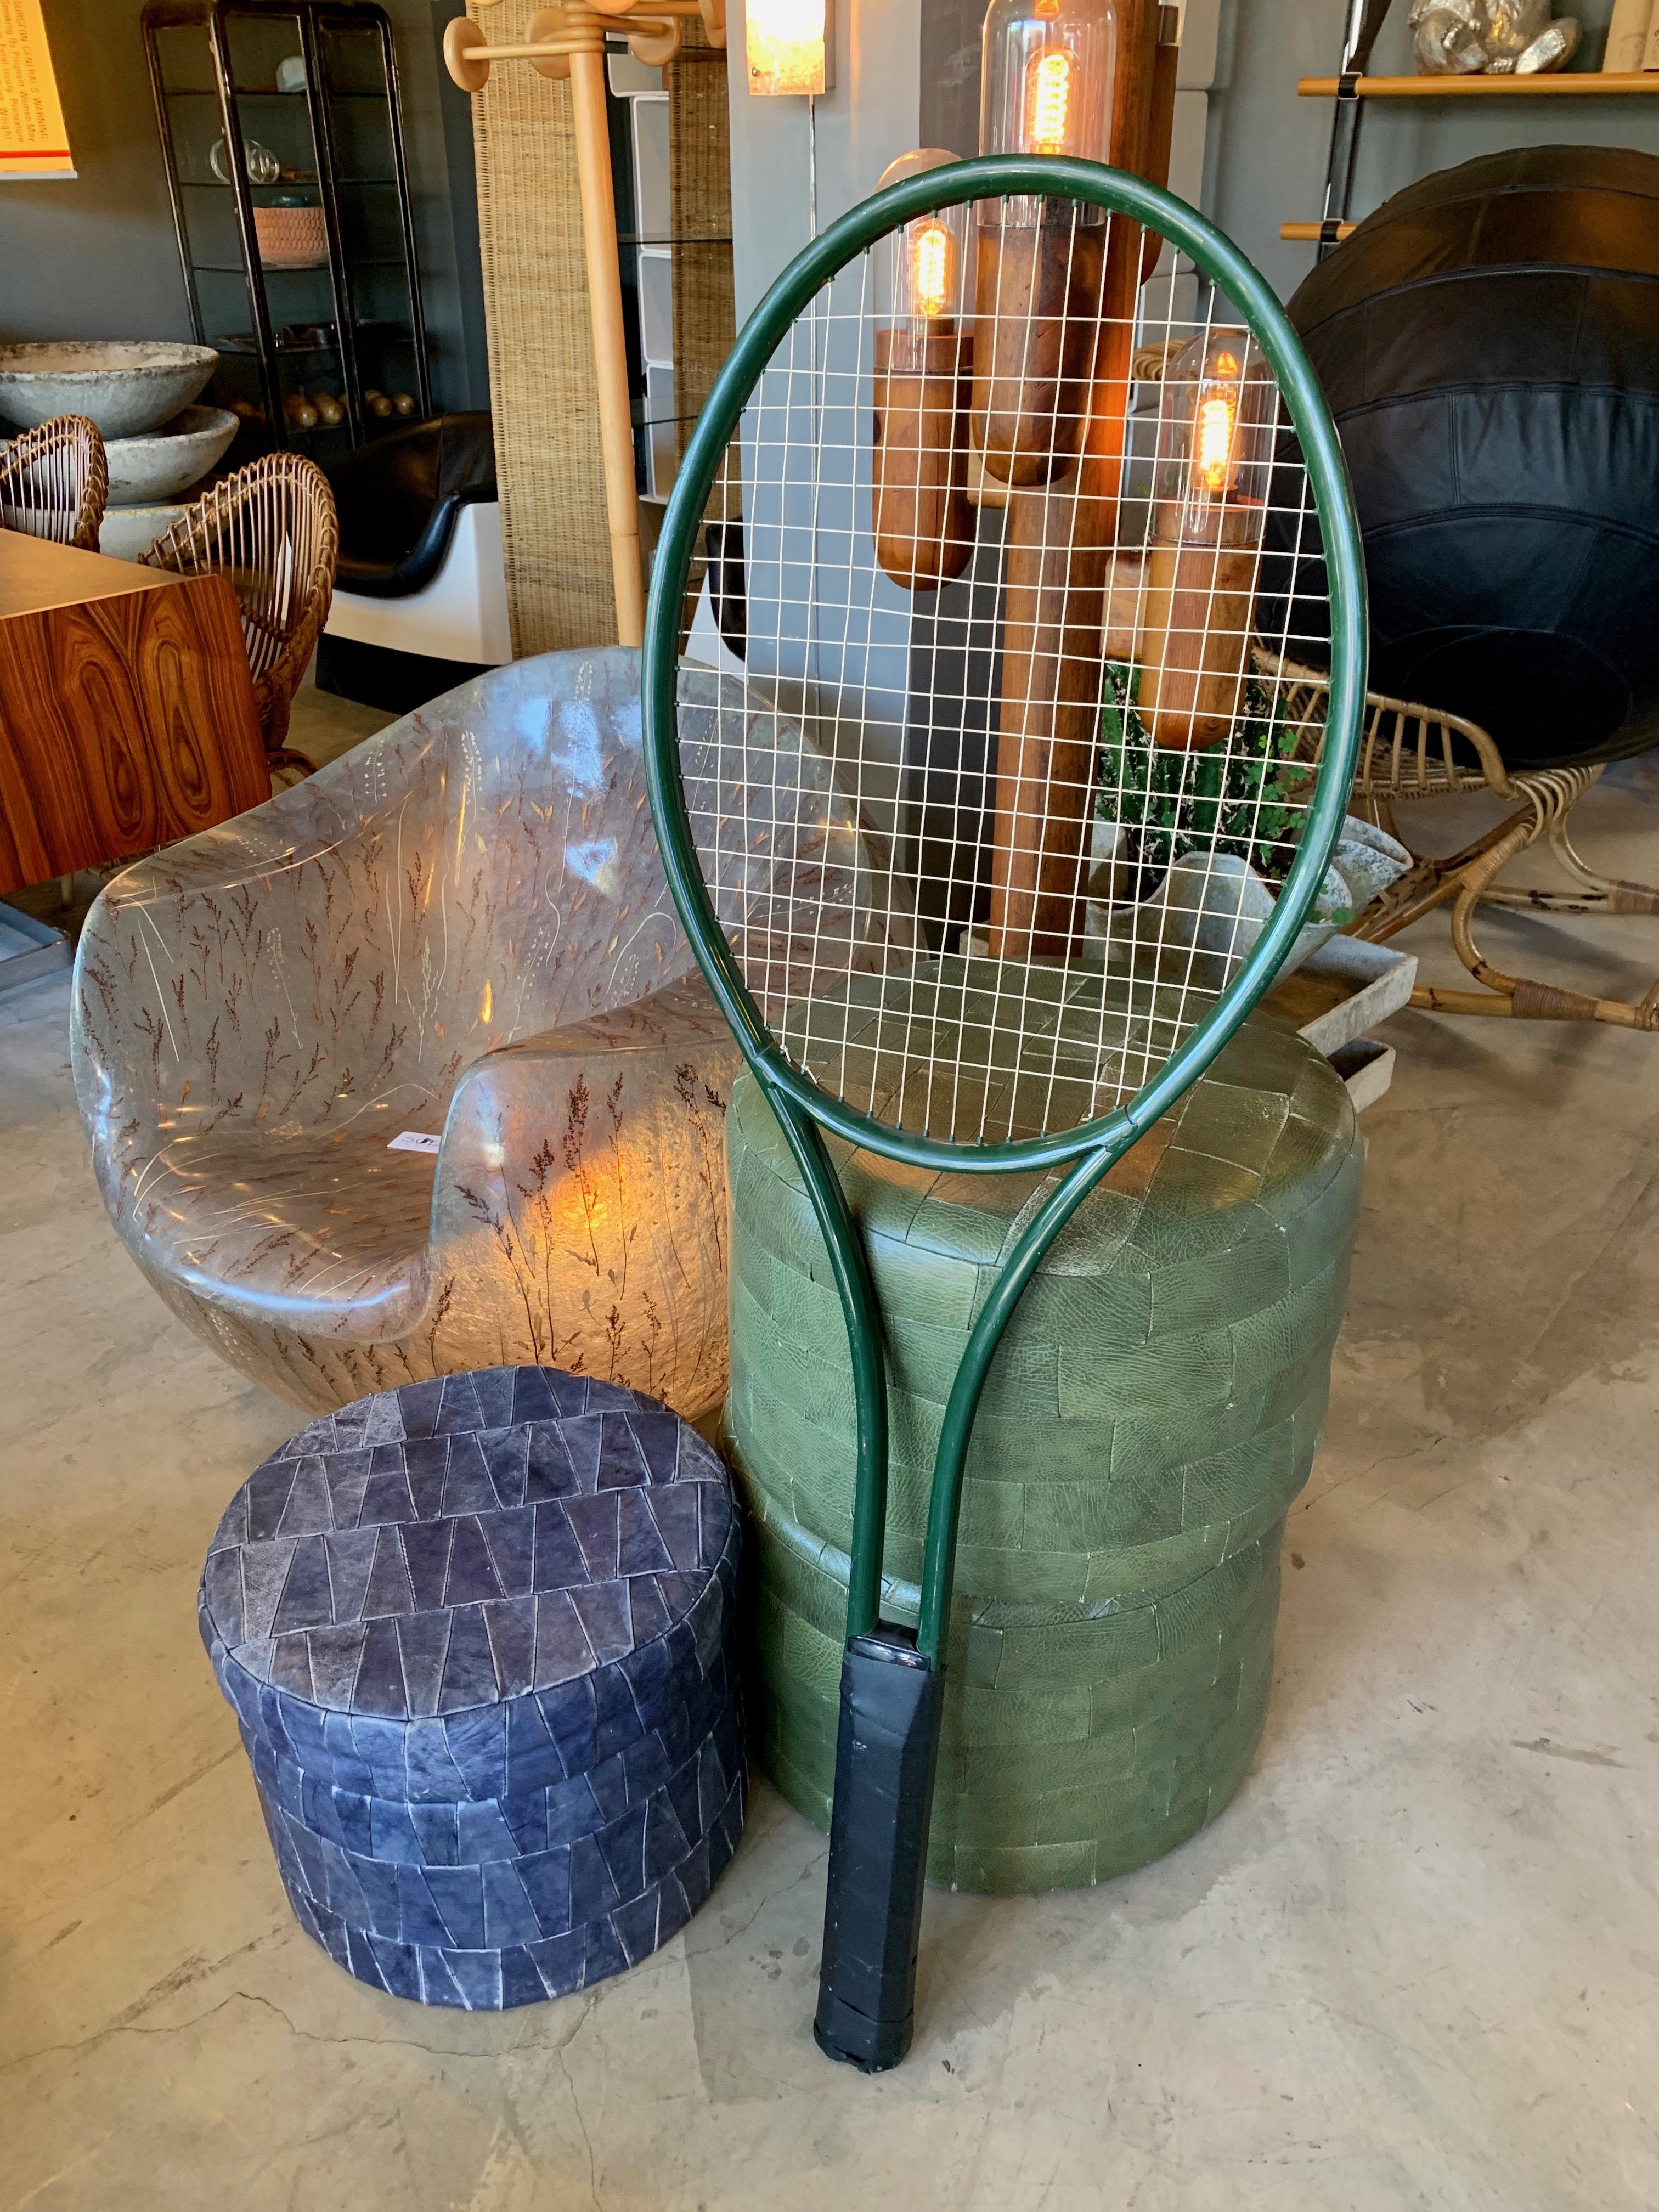 Fun piece of pop art. Giant metal tennis racket store display. Just over 4.5 feet tall. Good vintage condition. Some wear at bottom of handle. Great sculptural display piece.